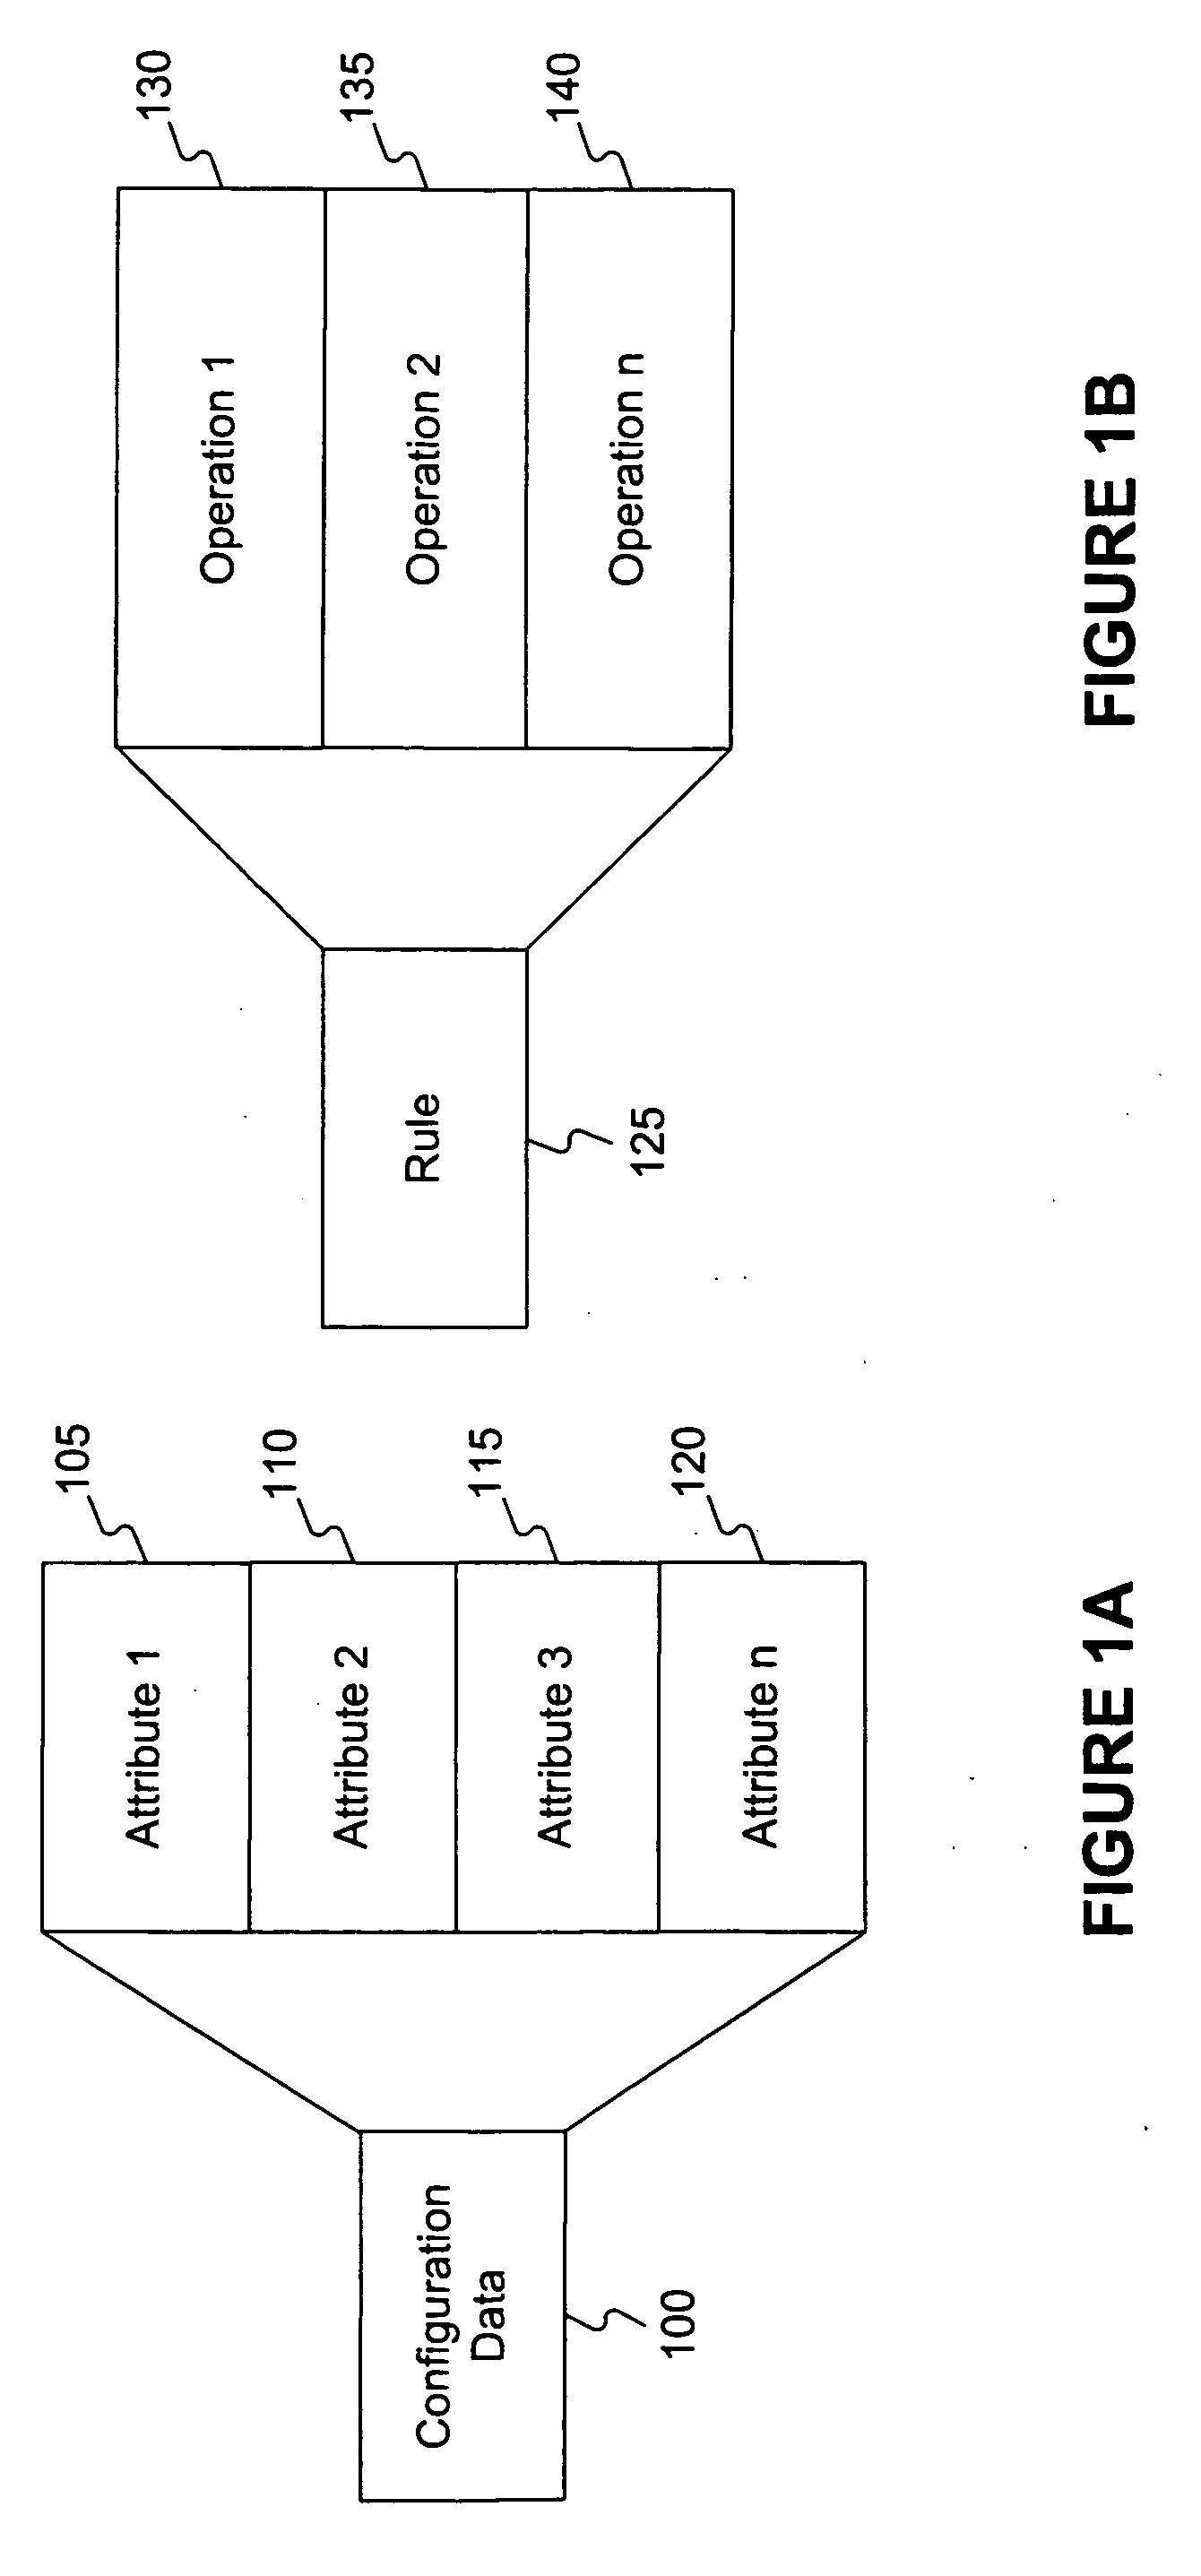 Methods of exposing application layer integrity as object oriented programming language elements